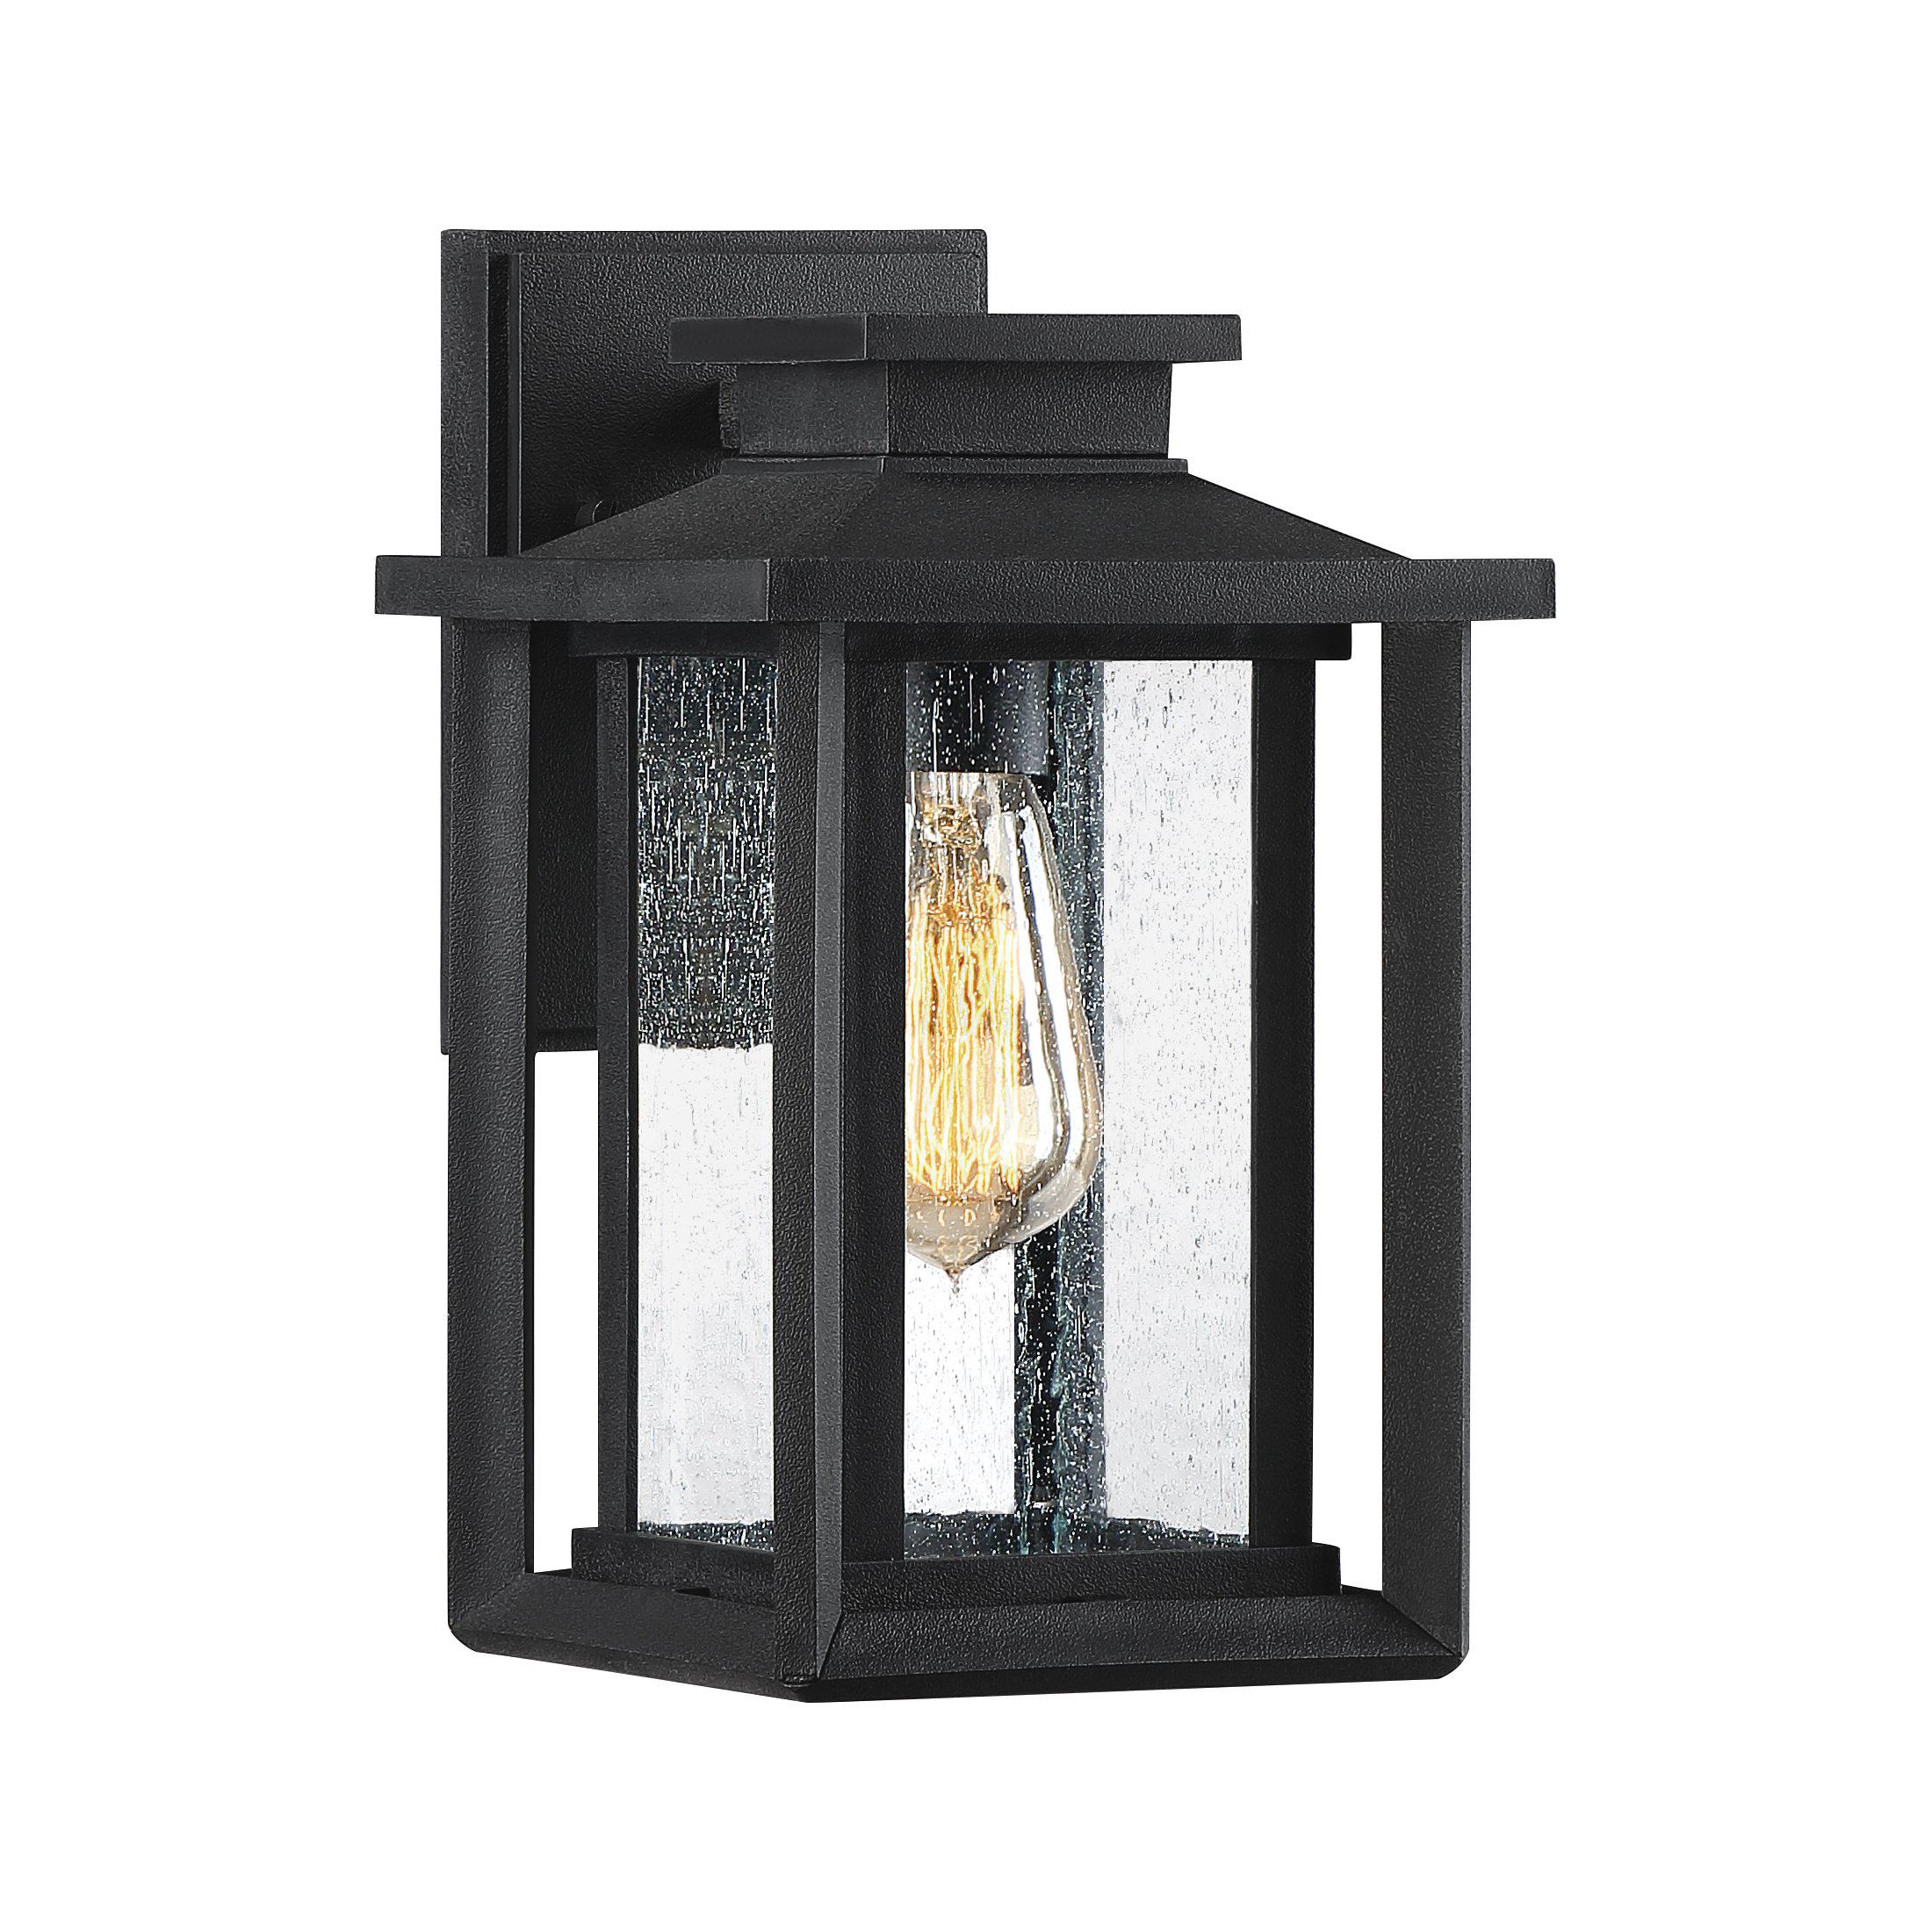 Quoizel Wakefield Outdoor Lantern, Small | Overstock Outdoor Light Fixture Quoizel Inc Earth Black  